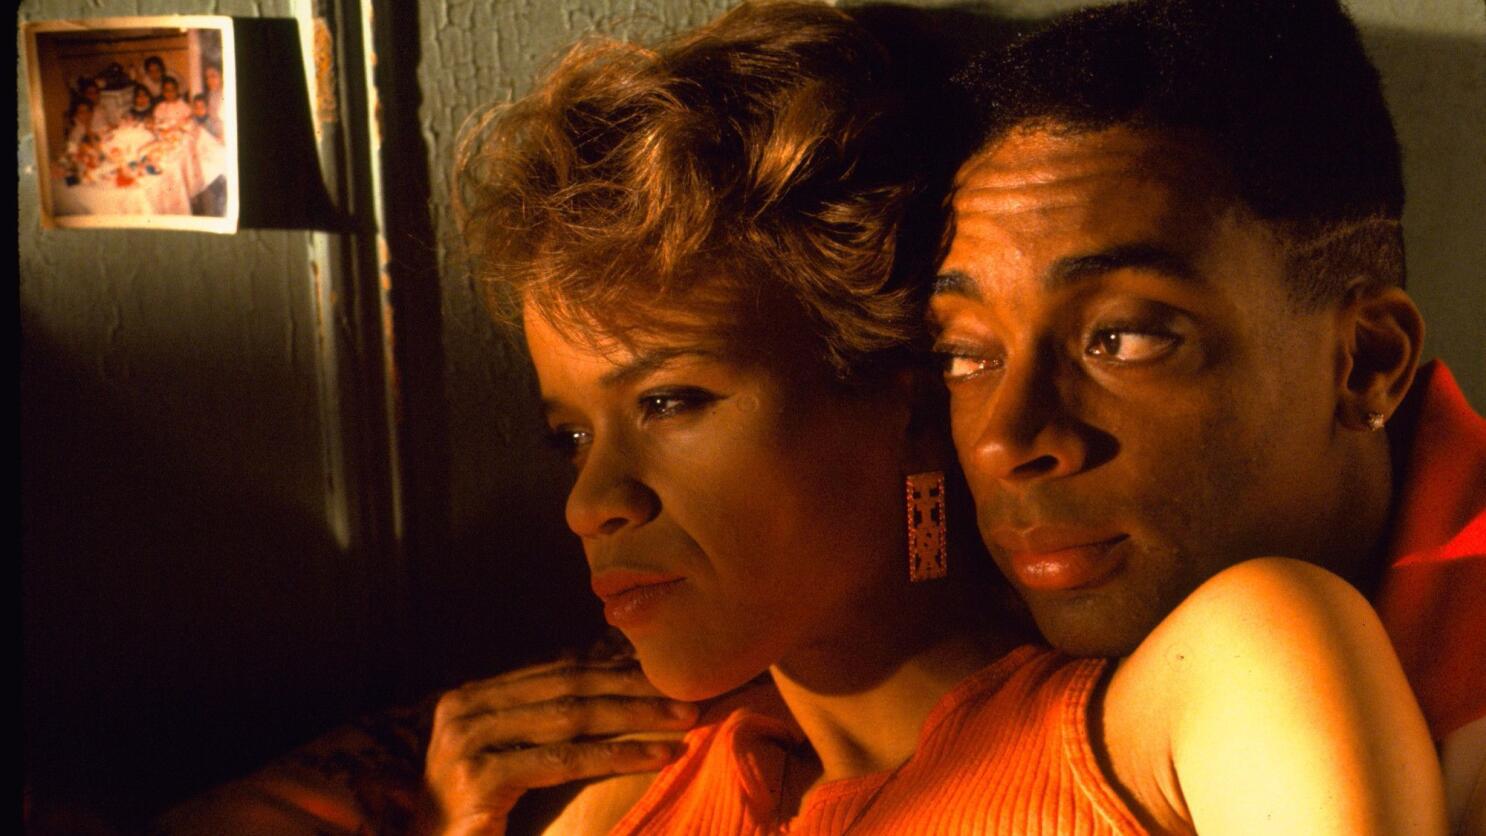 Rosie Perez and Spike Lee in "Do the Right Thing"